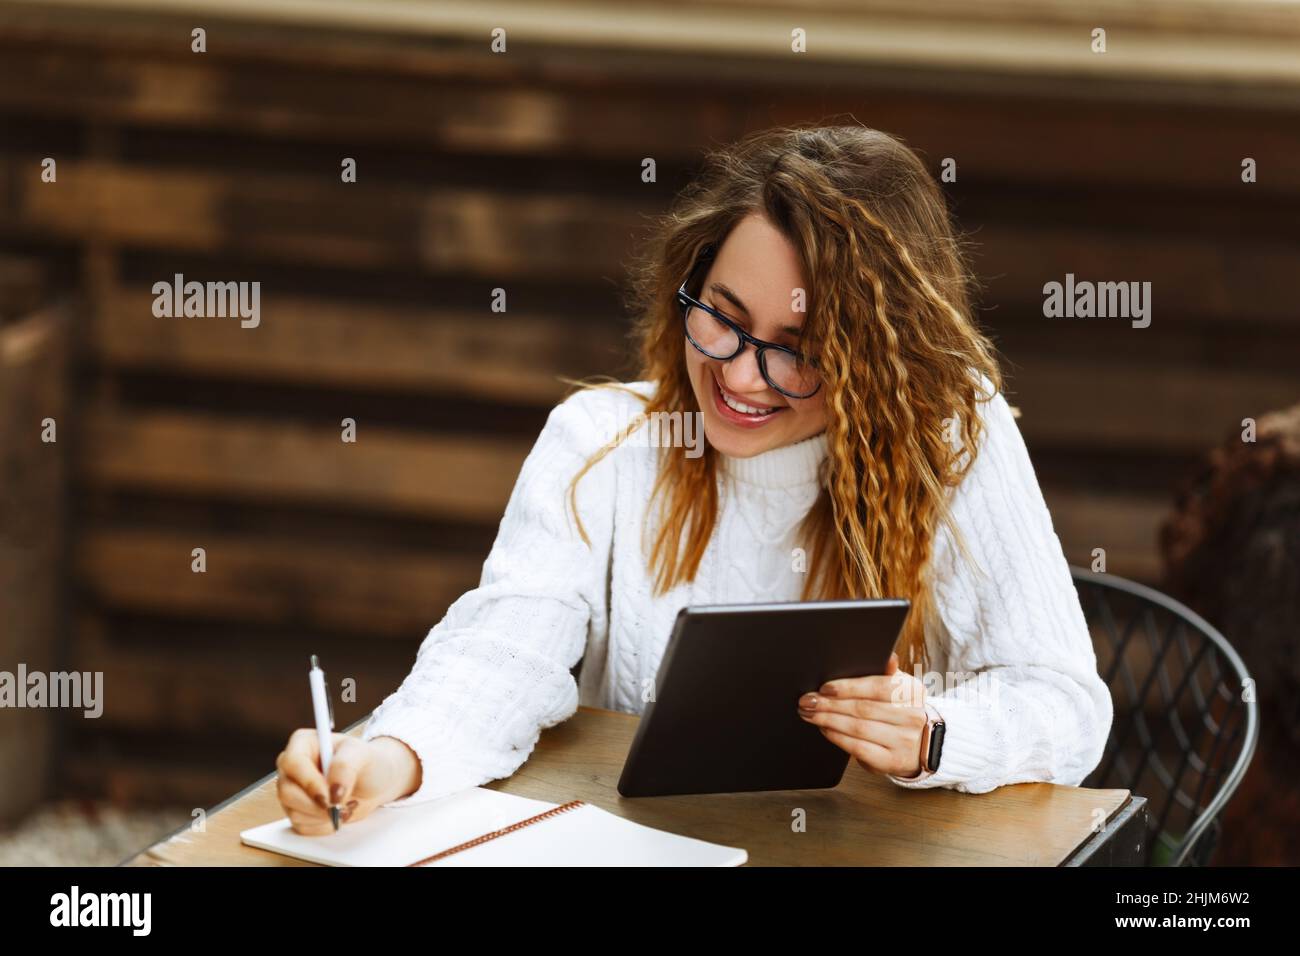 Young female student in glasses sitting at the table, using tablet when studying or working at cafe,using computer. Freelance business woman or student, blogging, studying, shopping, making notes. Stock Photo